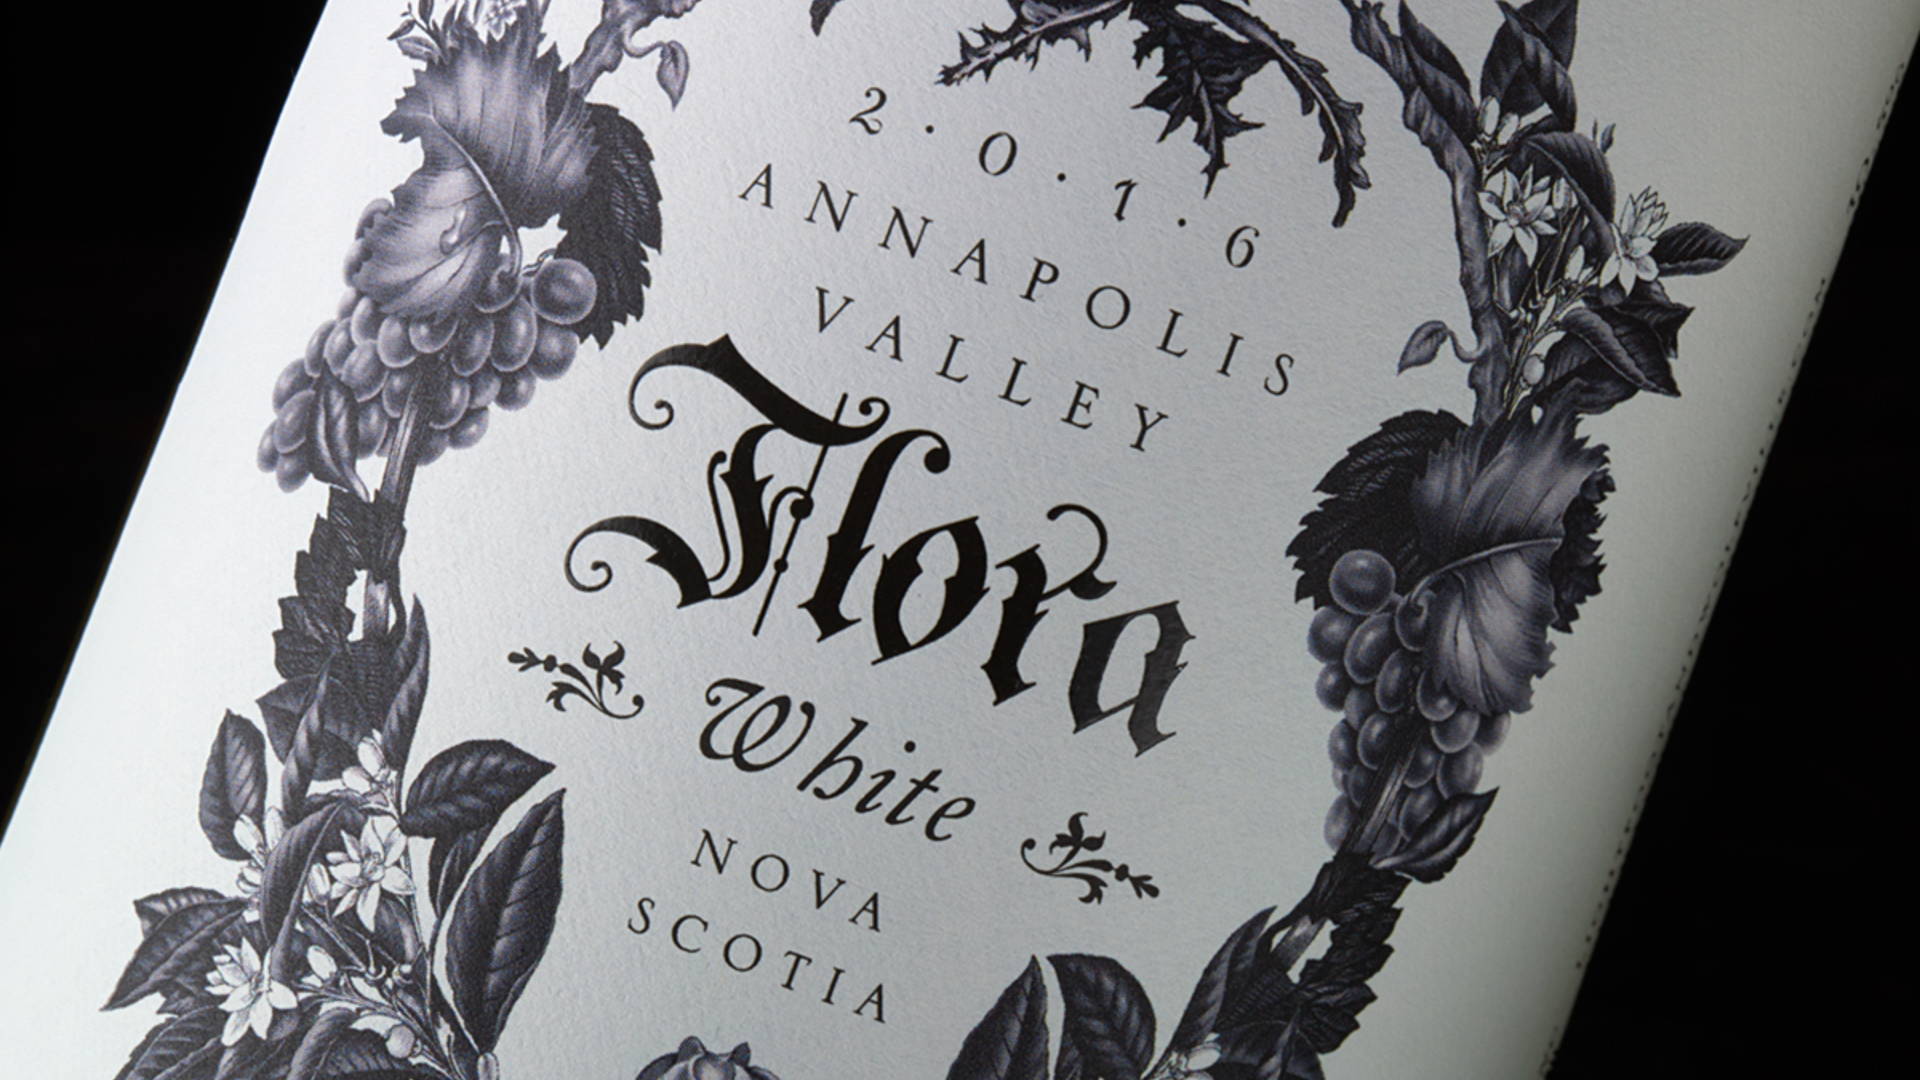 Featured image for Chad Michael Studio Designs Flora & Fauna Wine With Exquisite Detail